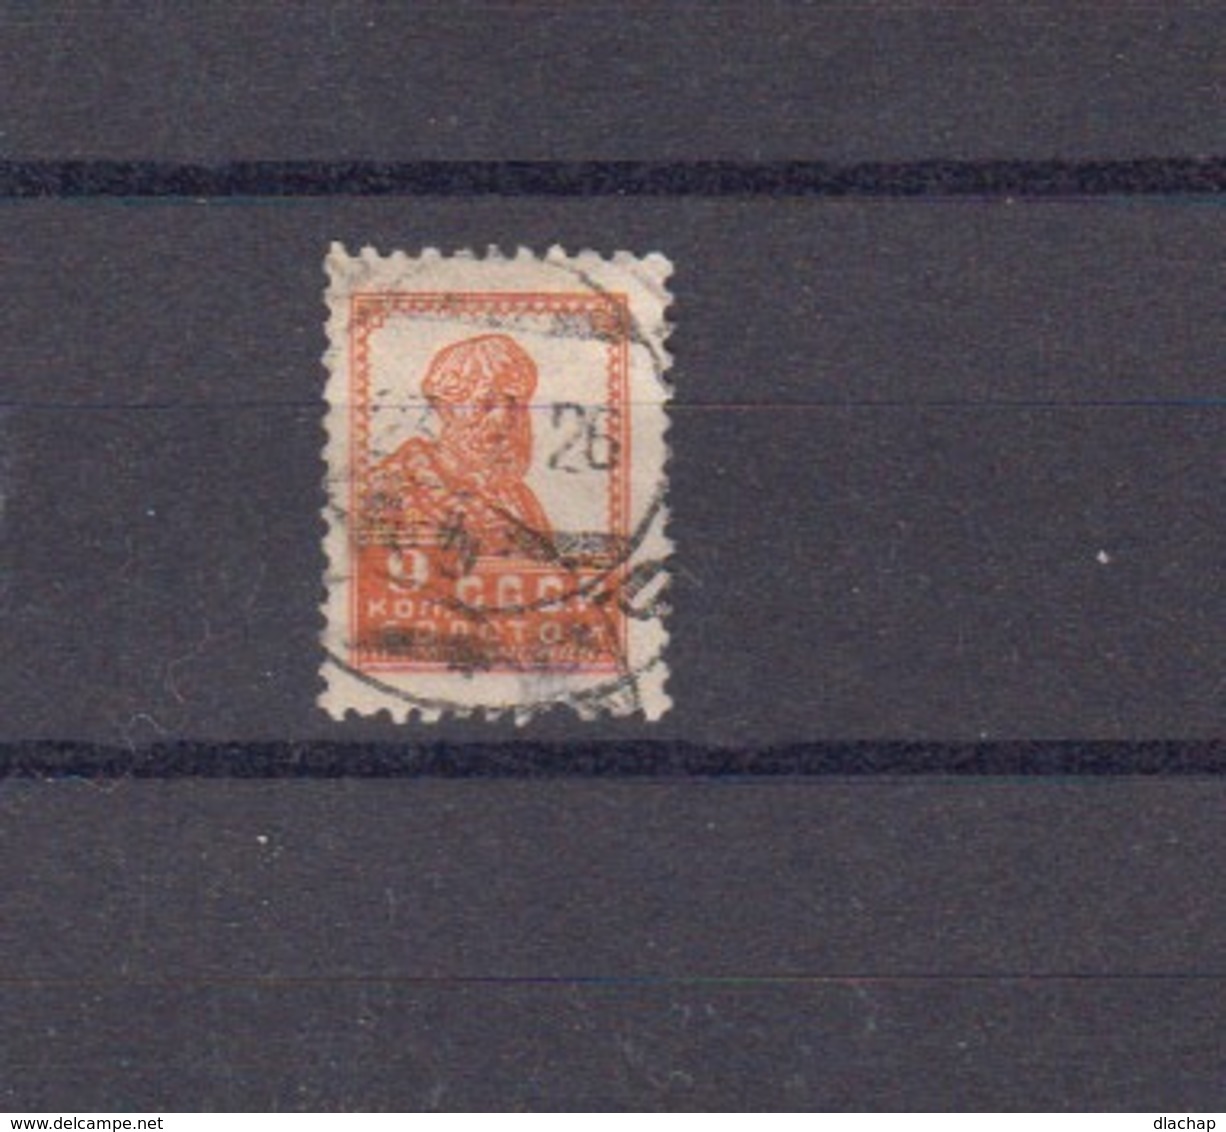 Russie. YT 254. 12. Oblitéré. Paysan. (3412) - Used Stamps